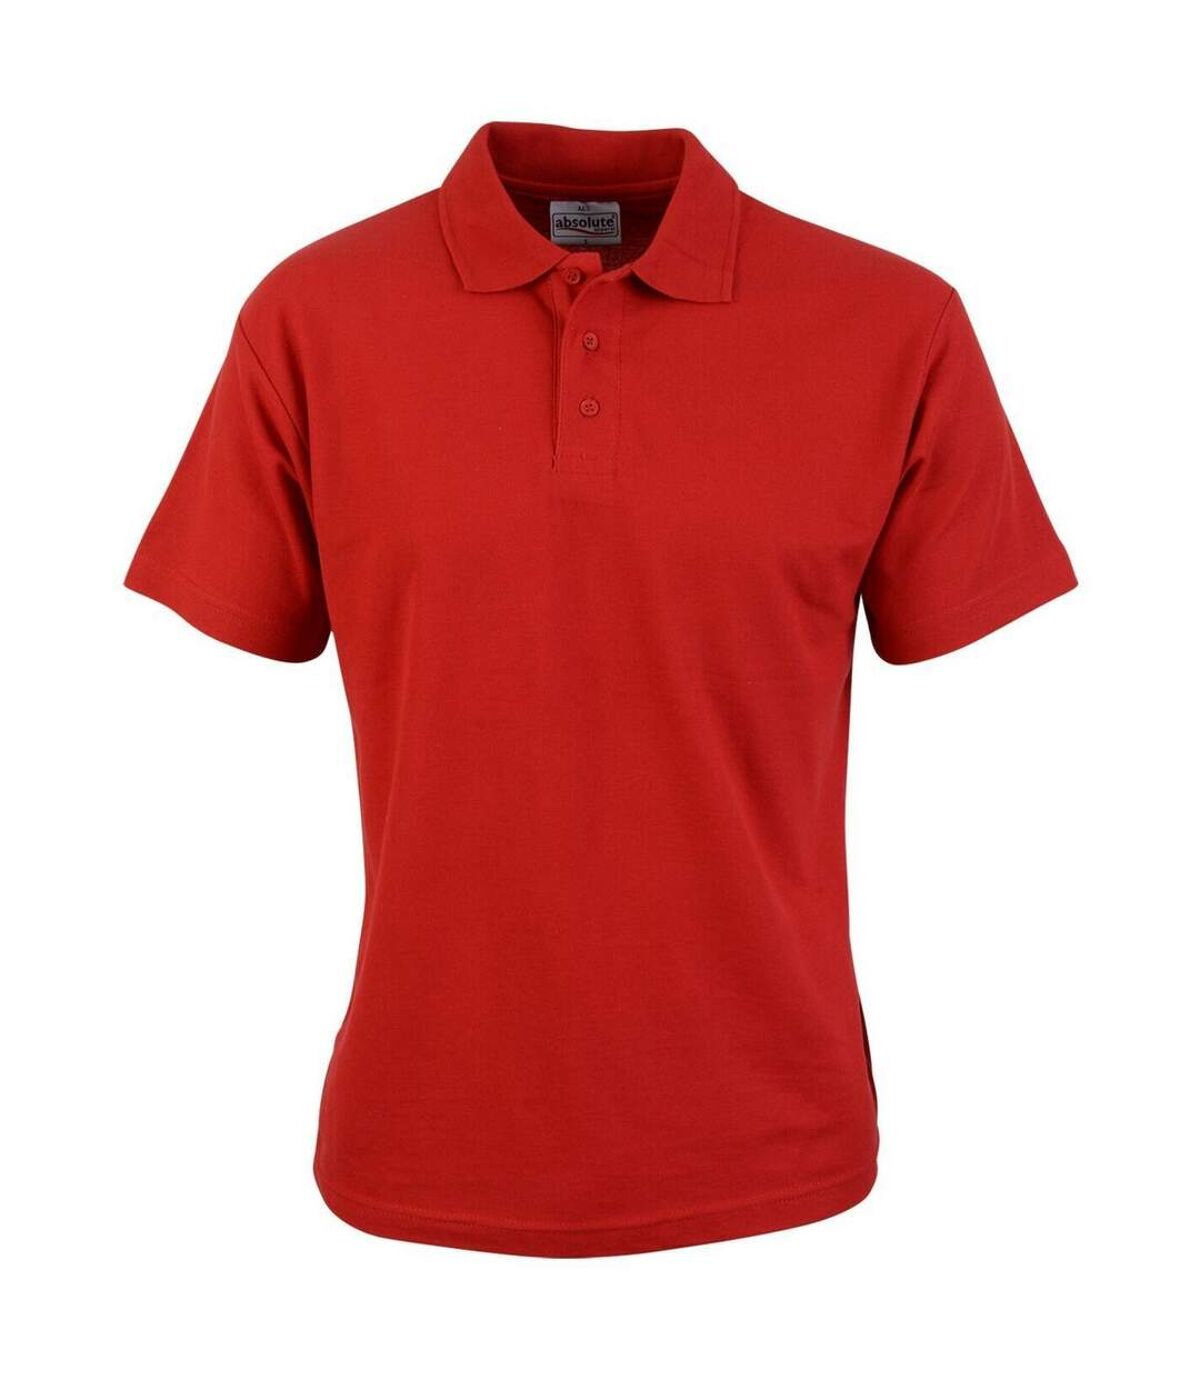 Absolute Apparel - Polo manches courtes PIONNER - Homme (Rouge) - UTAB104